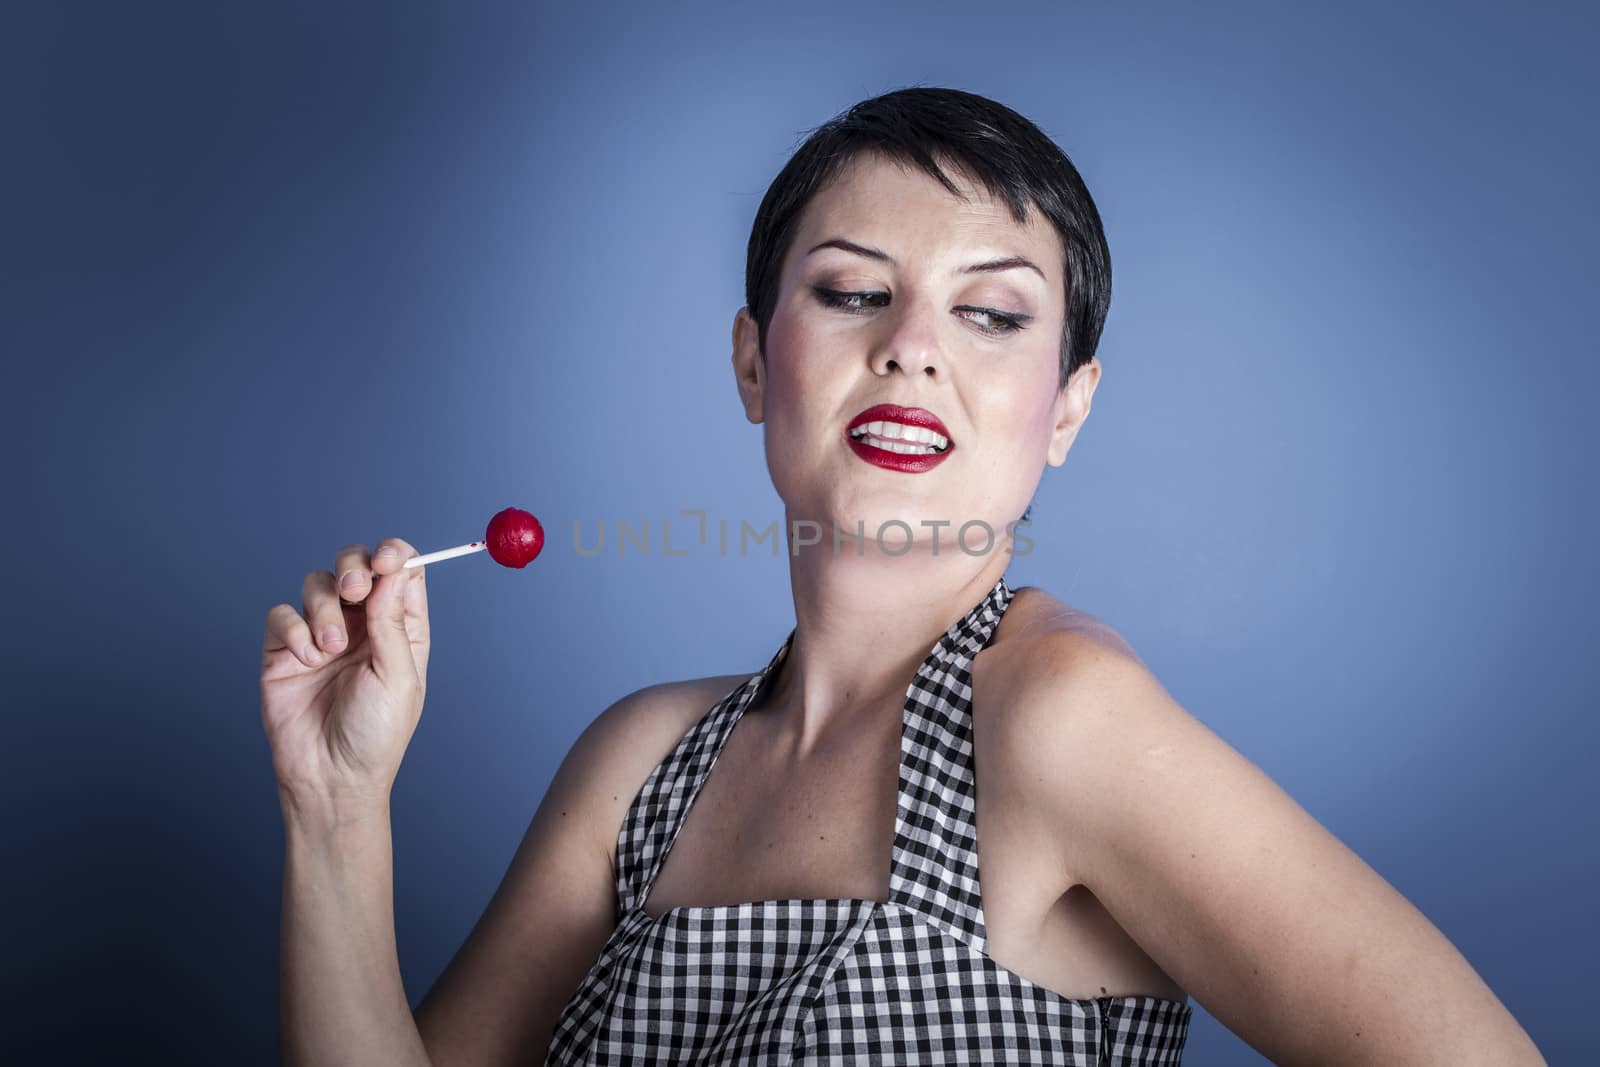 Eat, happy young woman with lollipop in her mouth on blue backg by FernandoCortes